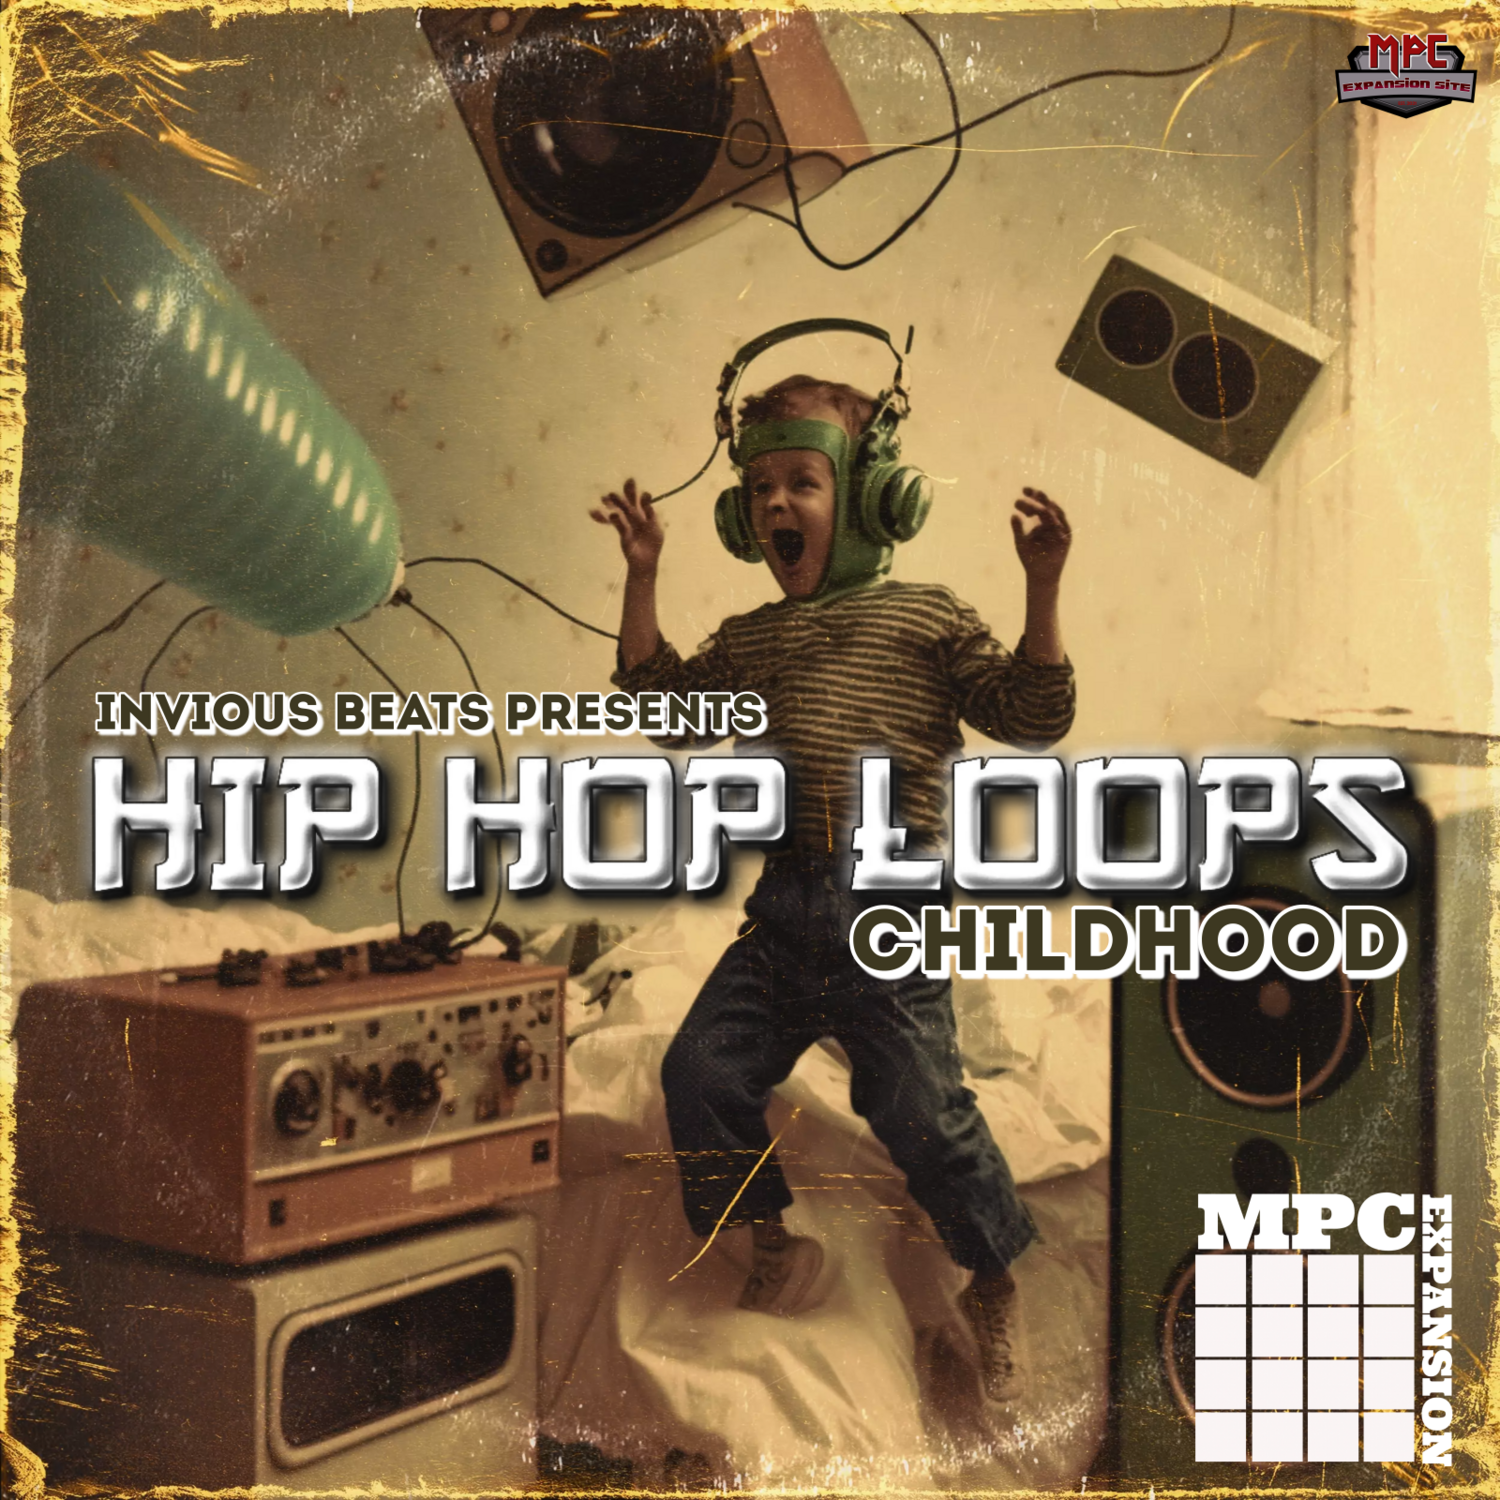 MPC EXPANSION 'CHILDHOOD' by INVIOUS